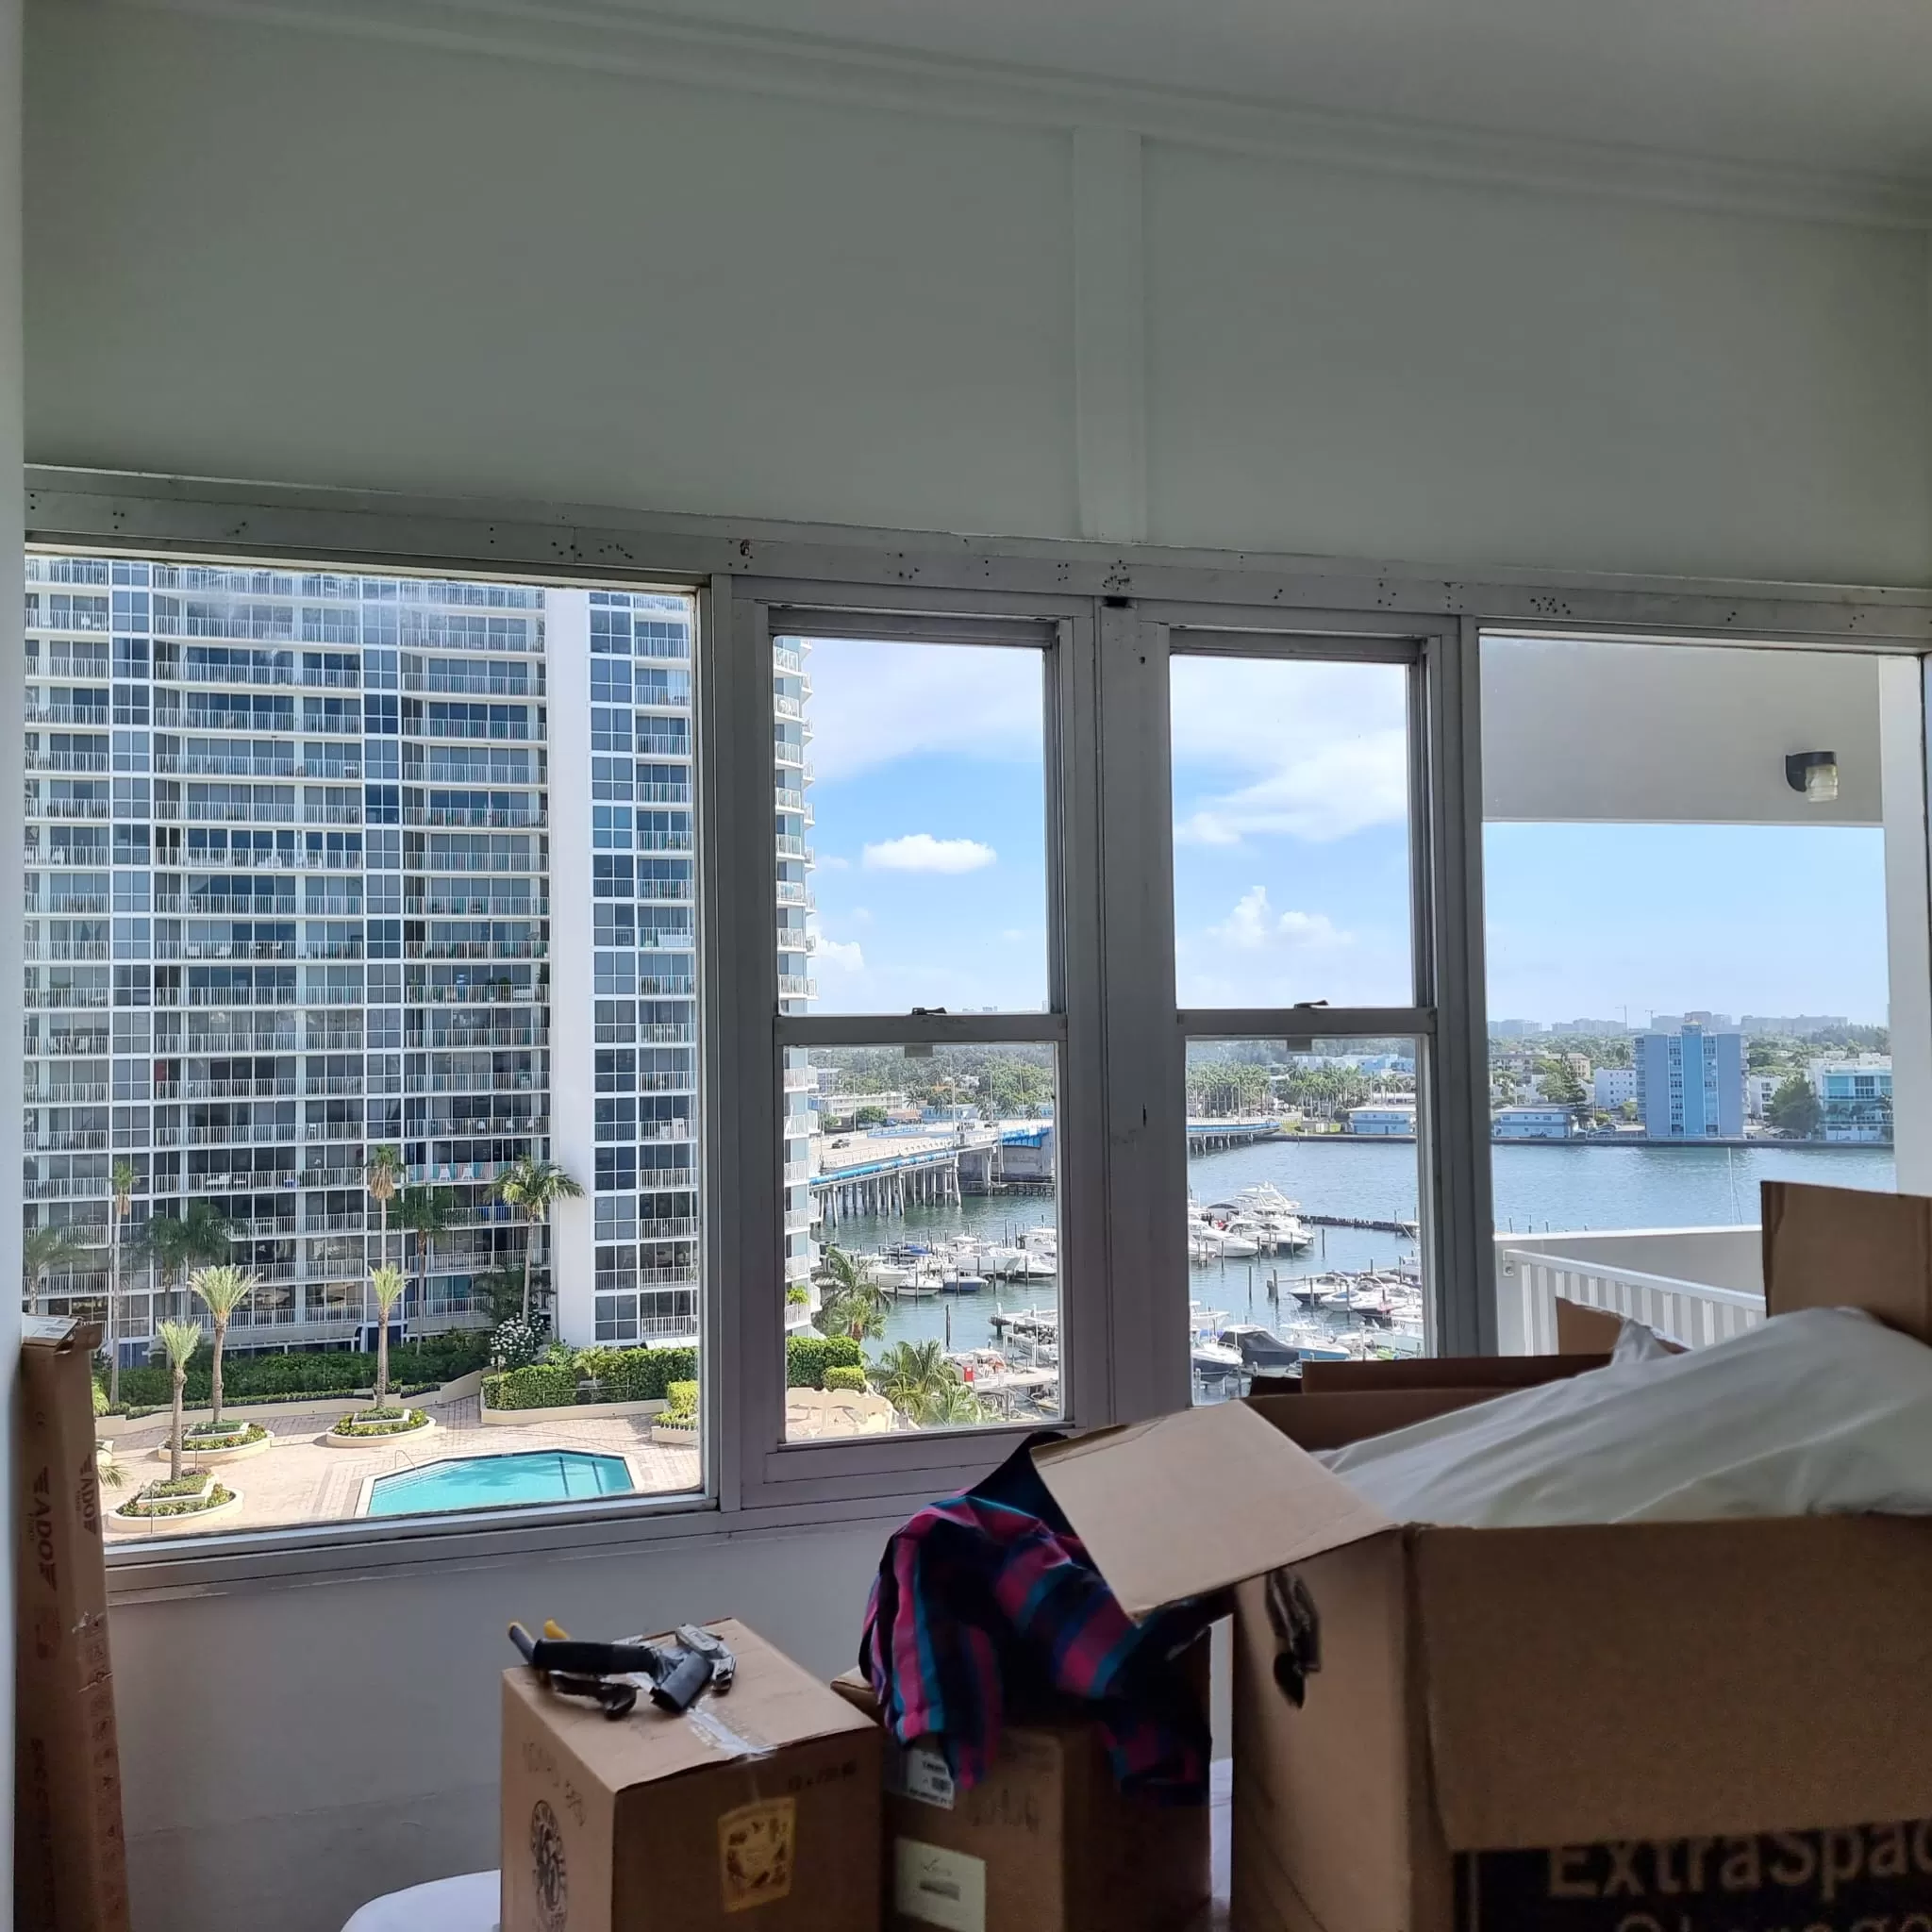 Window Cleaning and Construction Clean Up in North Bay Village, FL